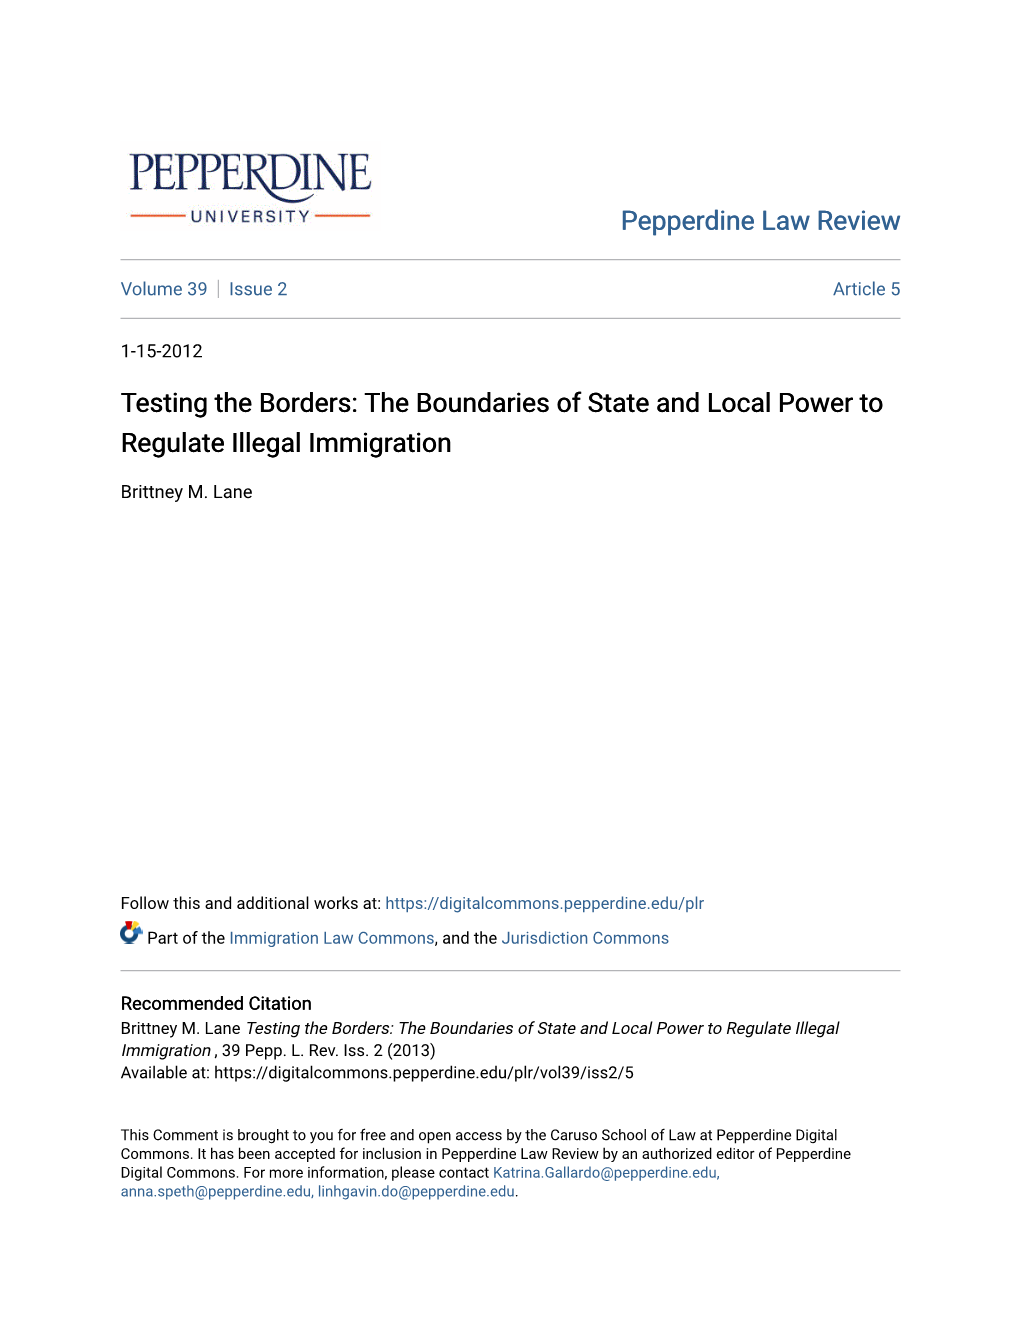 The Boundaries of State and Local Power to Regulate Illegal Immigration